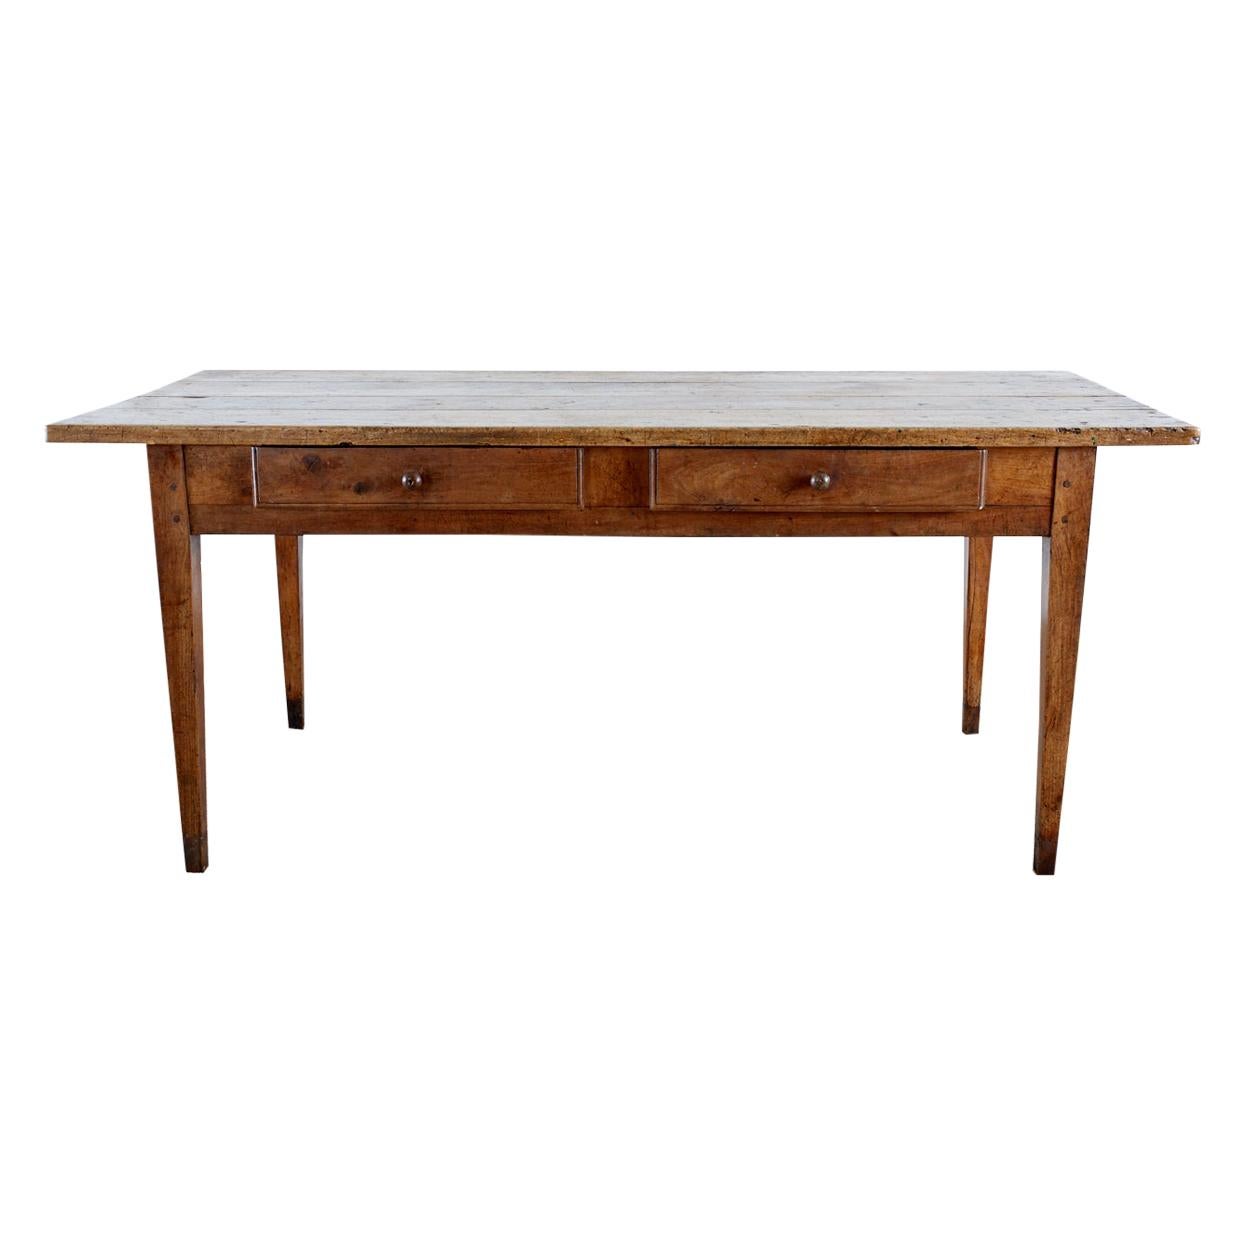 18th Century Country French Farmhouse Work Table or Desk